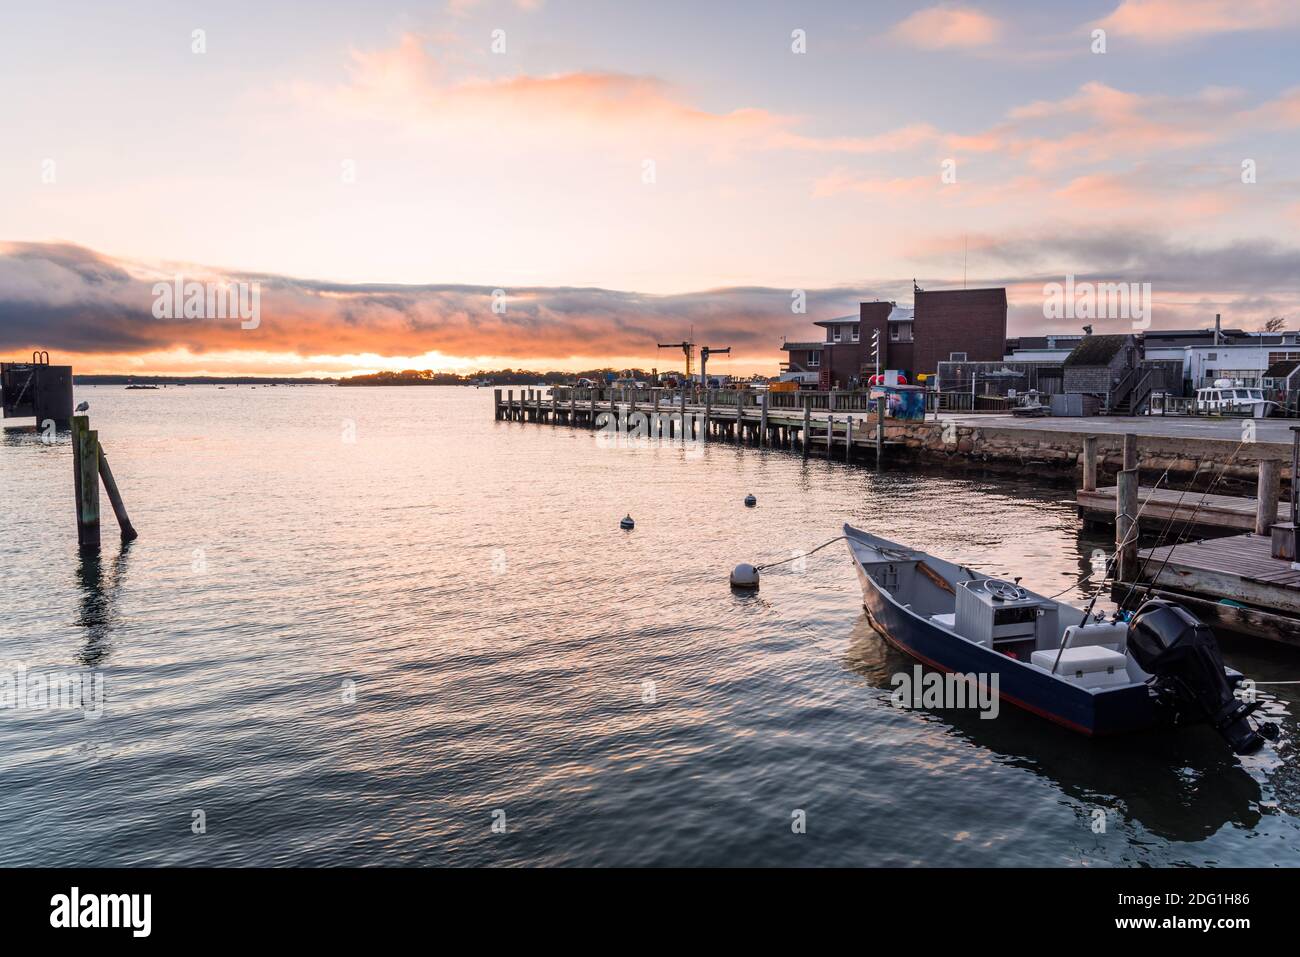 Harbour at sunset. A small moored motorboat with fishing rodsin it is visible in foreground. Stock Photo